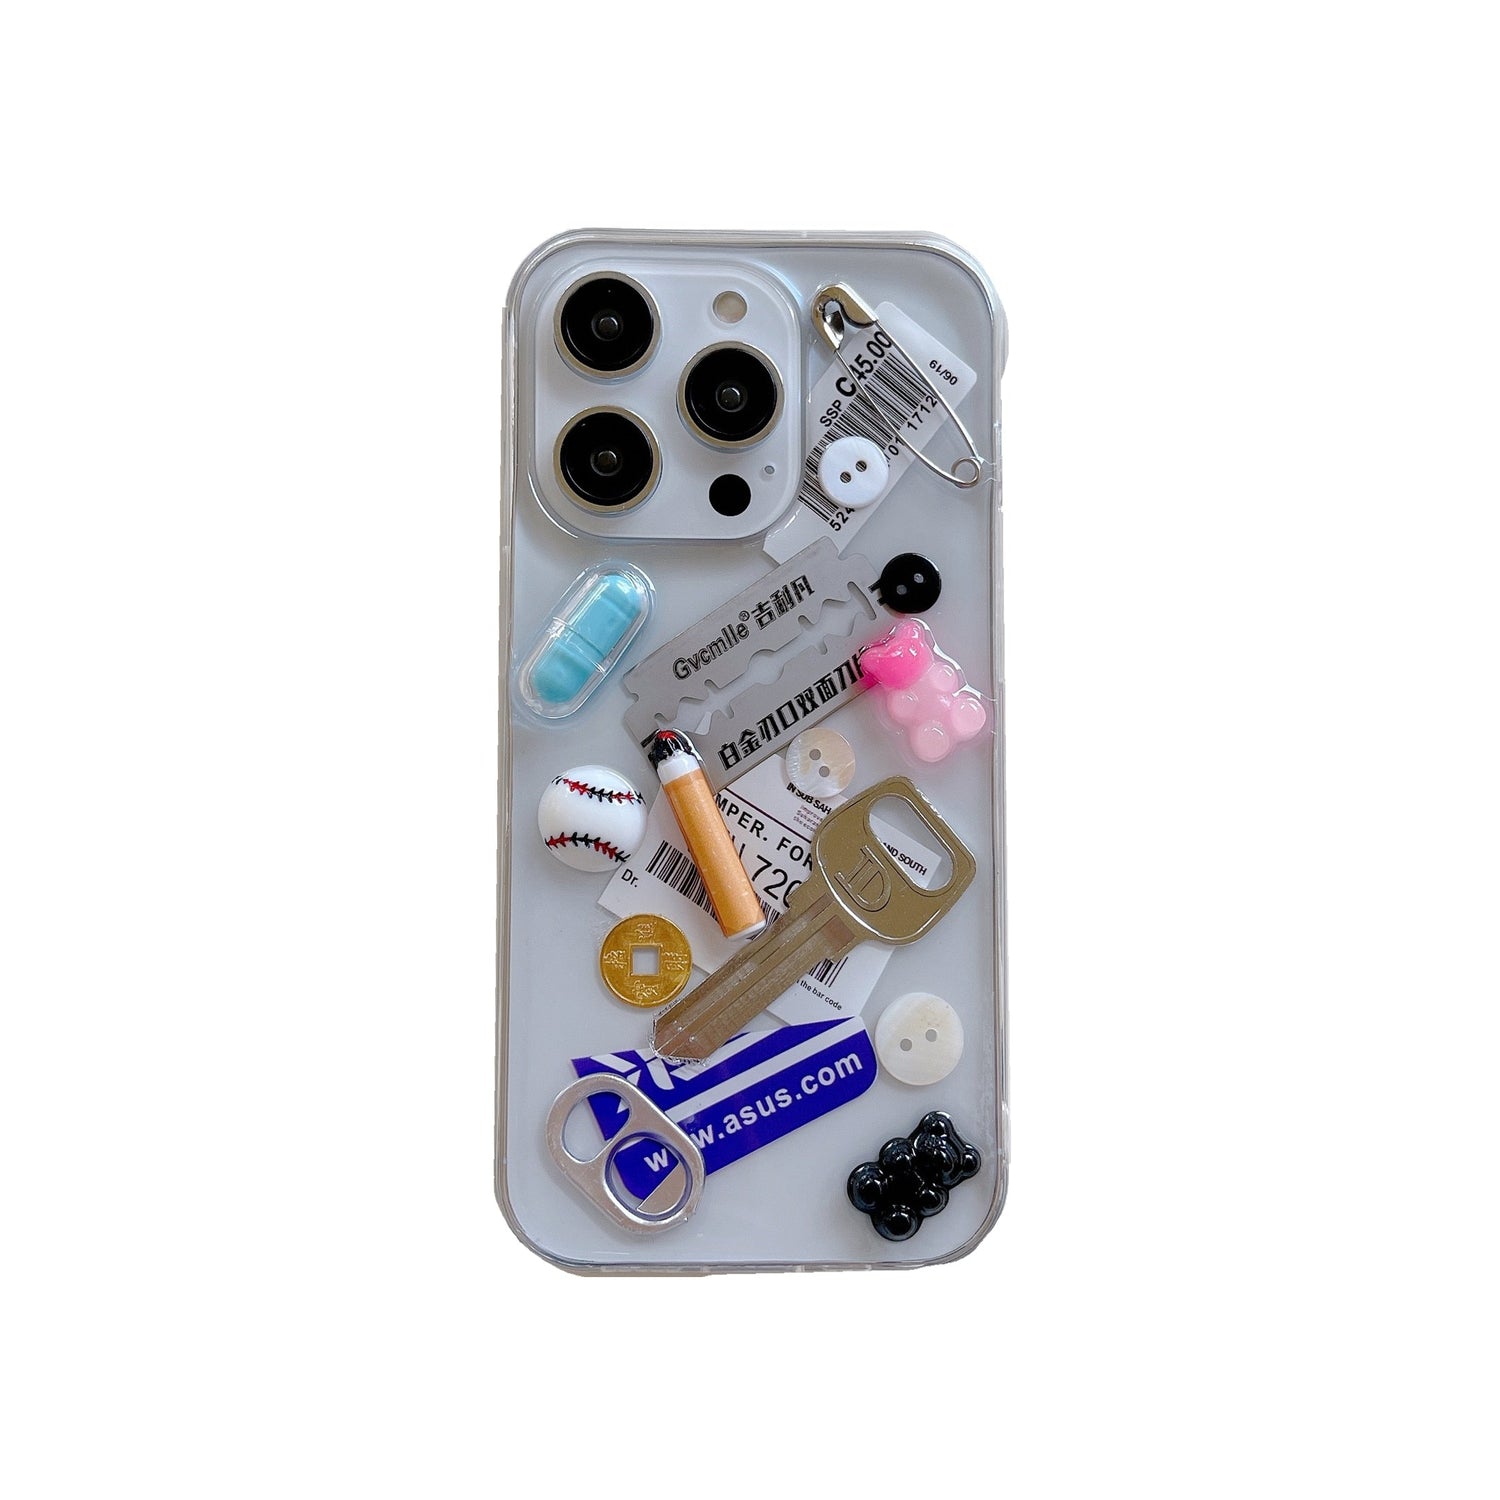 Cigarette & Knife iPhone Case - iPhone Cases